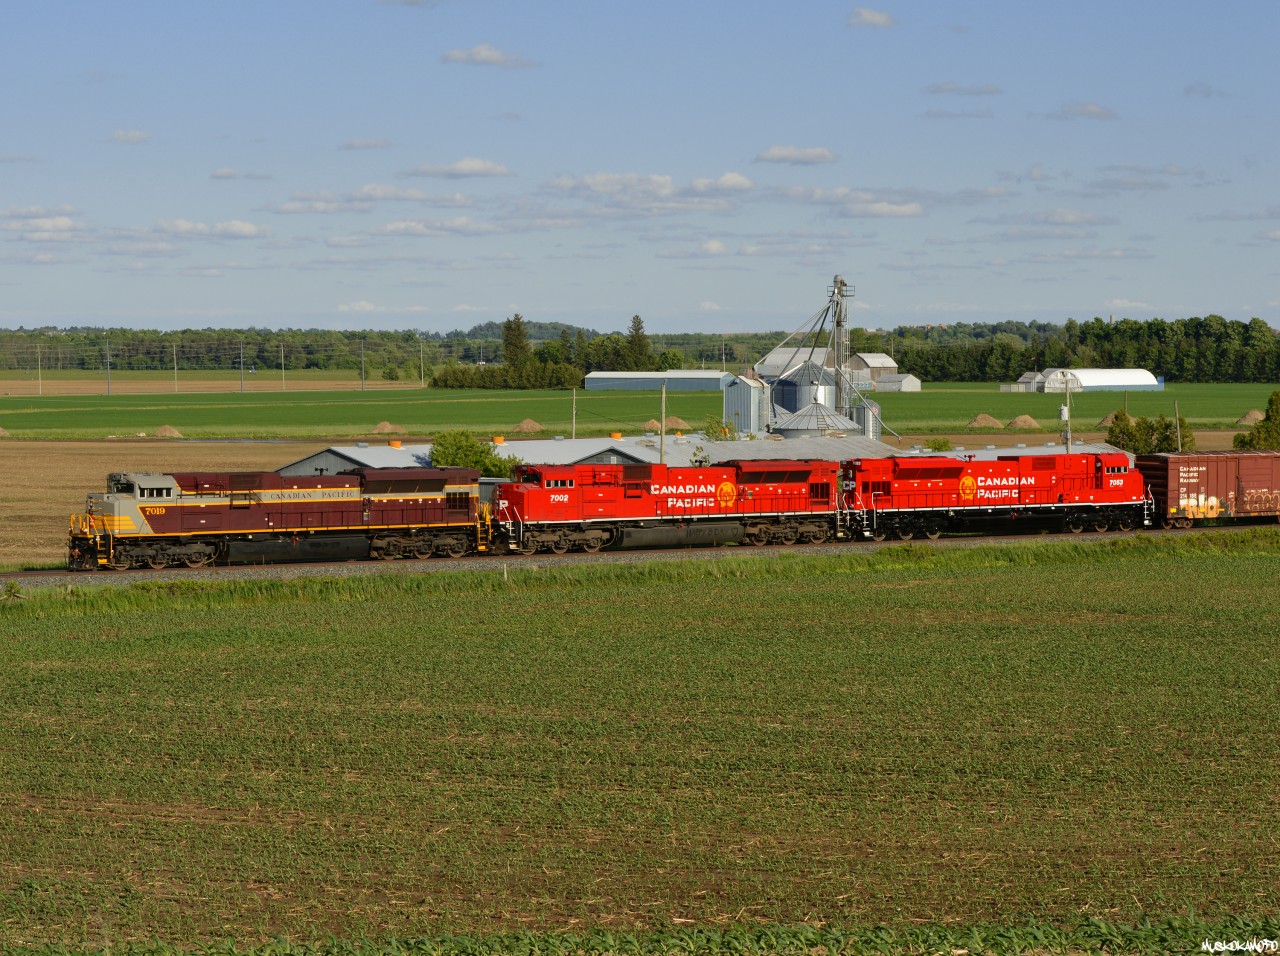 CP 421 with CP 7019, CP 7002 and CP 7053 about to tuck into the siding at Baxter for a 112 after a tail end lift at Spence.